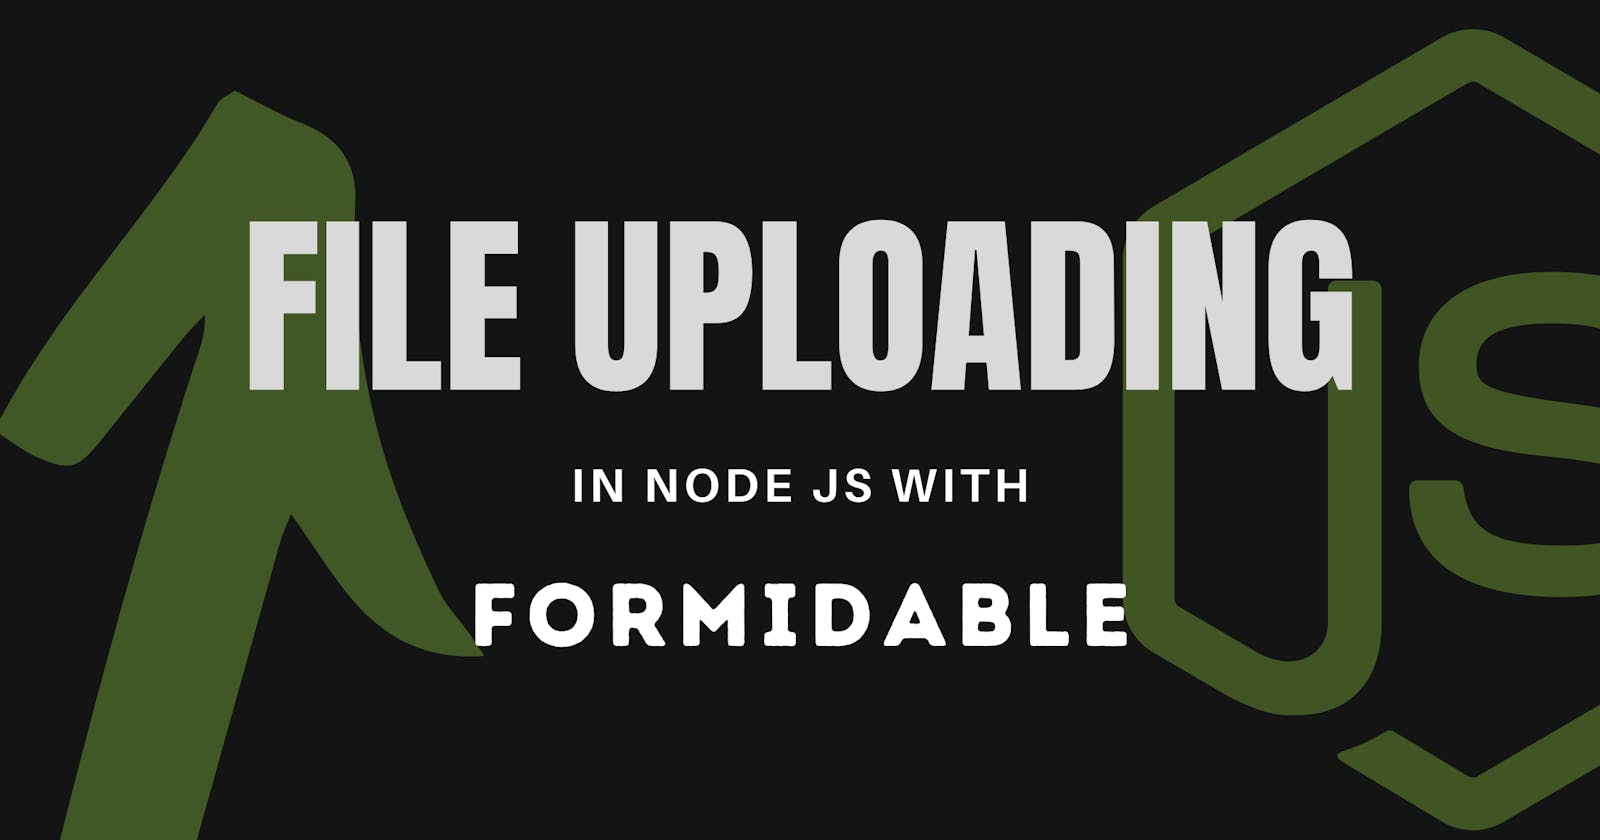 Handle file uploads in Node JS with Formidable